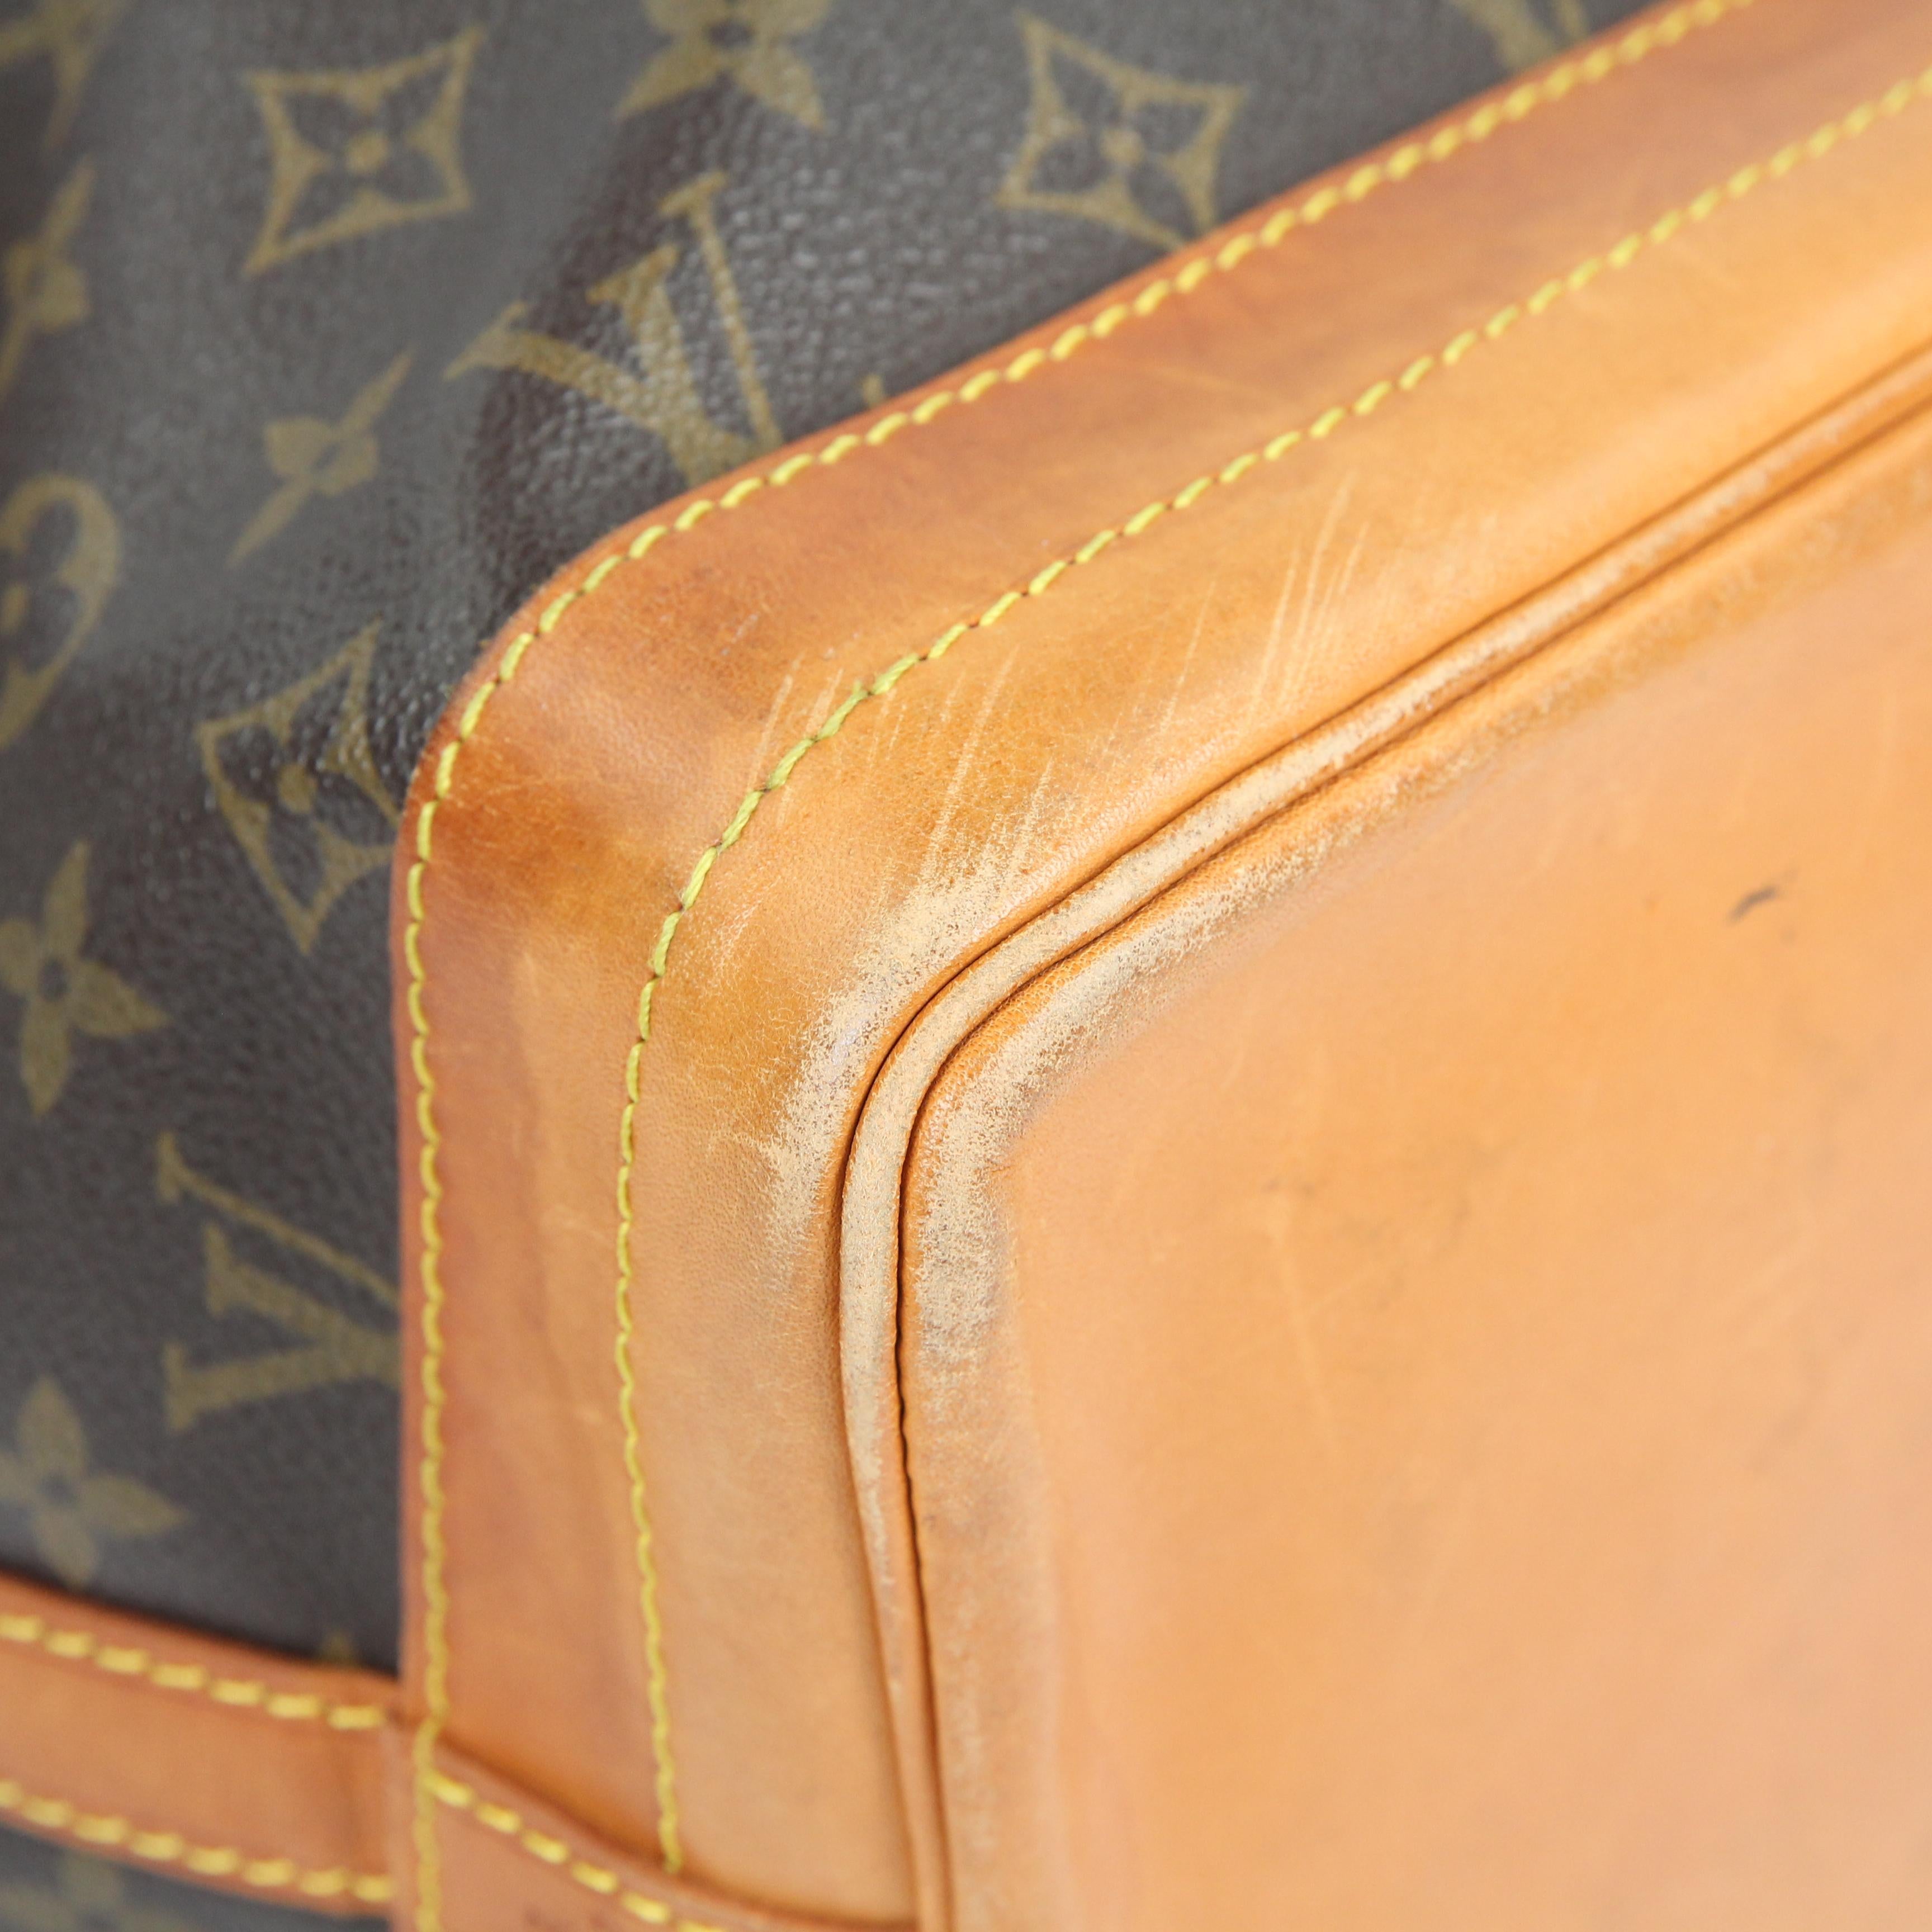 The Louis Vuitton Monogram Canvas Noe bag is a timeless and privileged piece that will never go out of style. It was originally created in 1932 to carry five bottles of champagne. With its ultra-spacious interior and leather drawstring closure, this